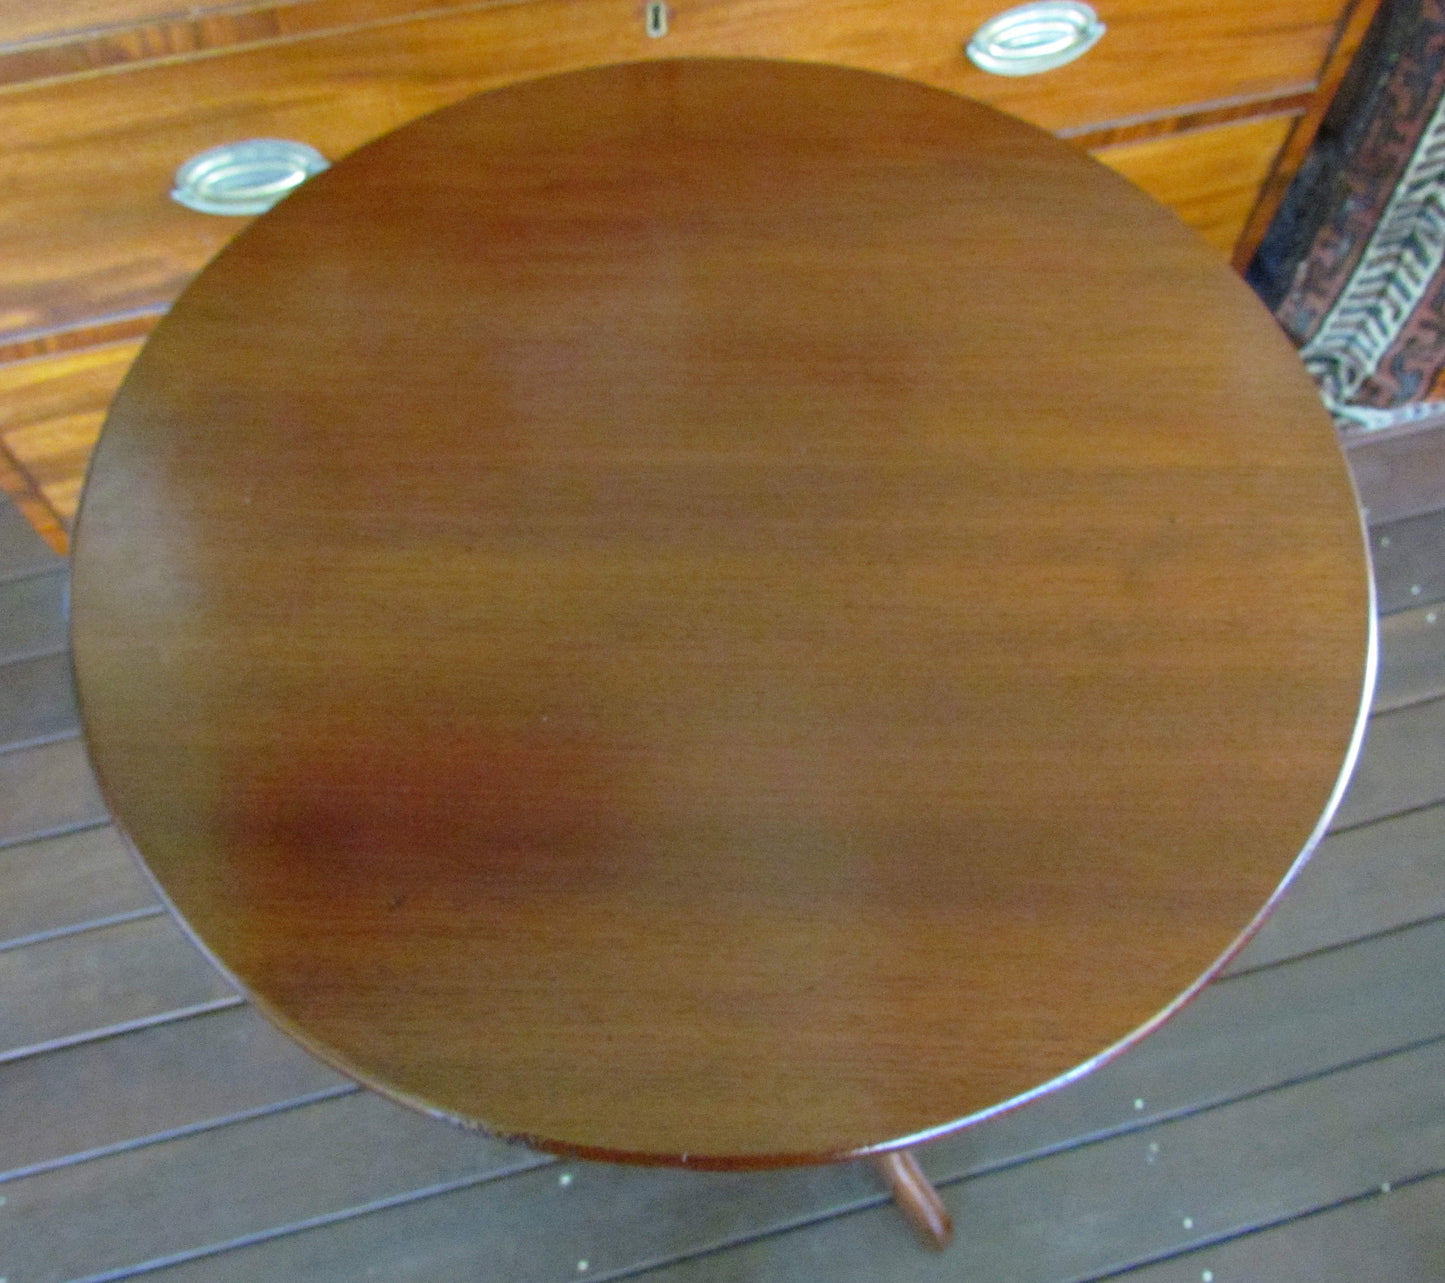 Australian Red Cedar Turned Column Wine Table With Round Top c1870